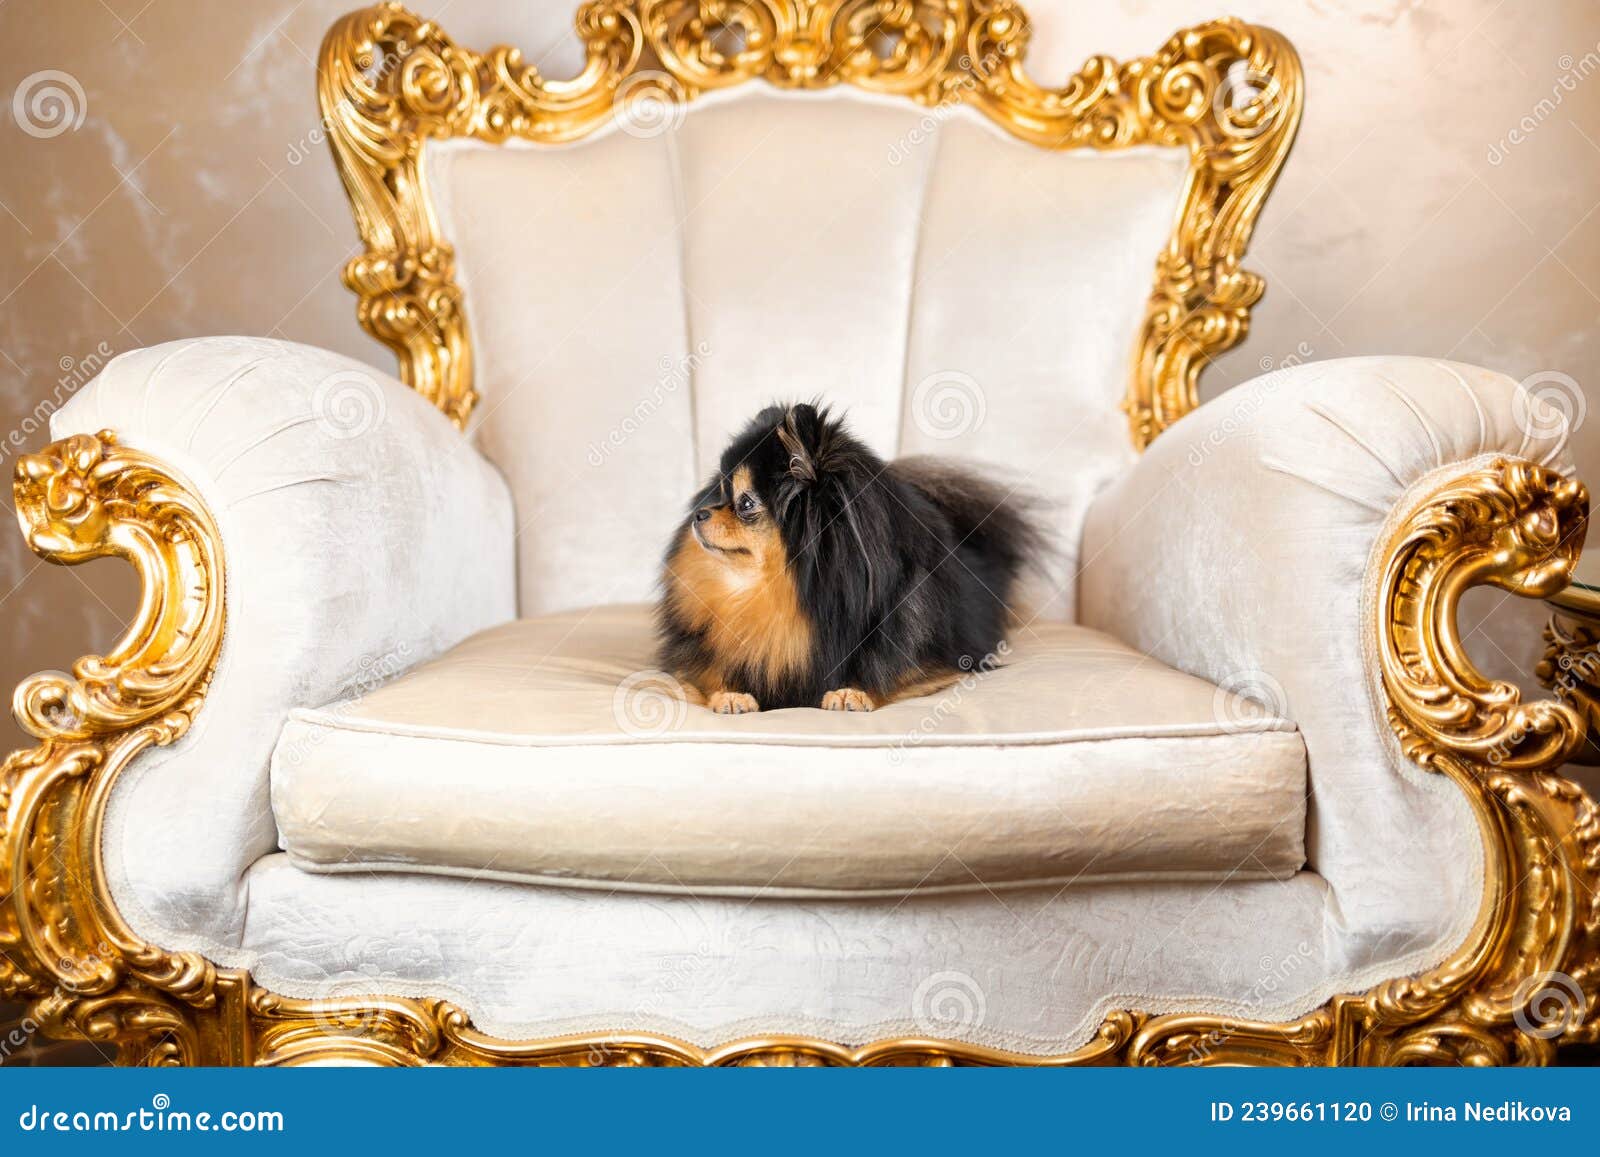 pomeranian spitz dog of black sable color lying down on classic gold armchair